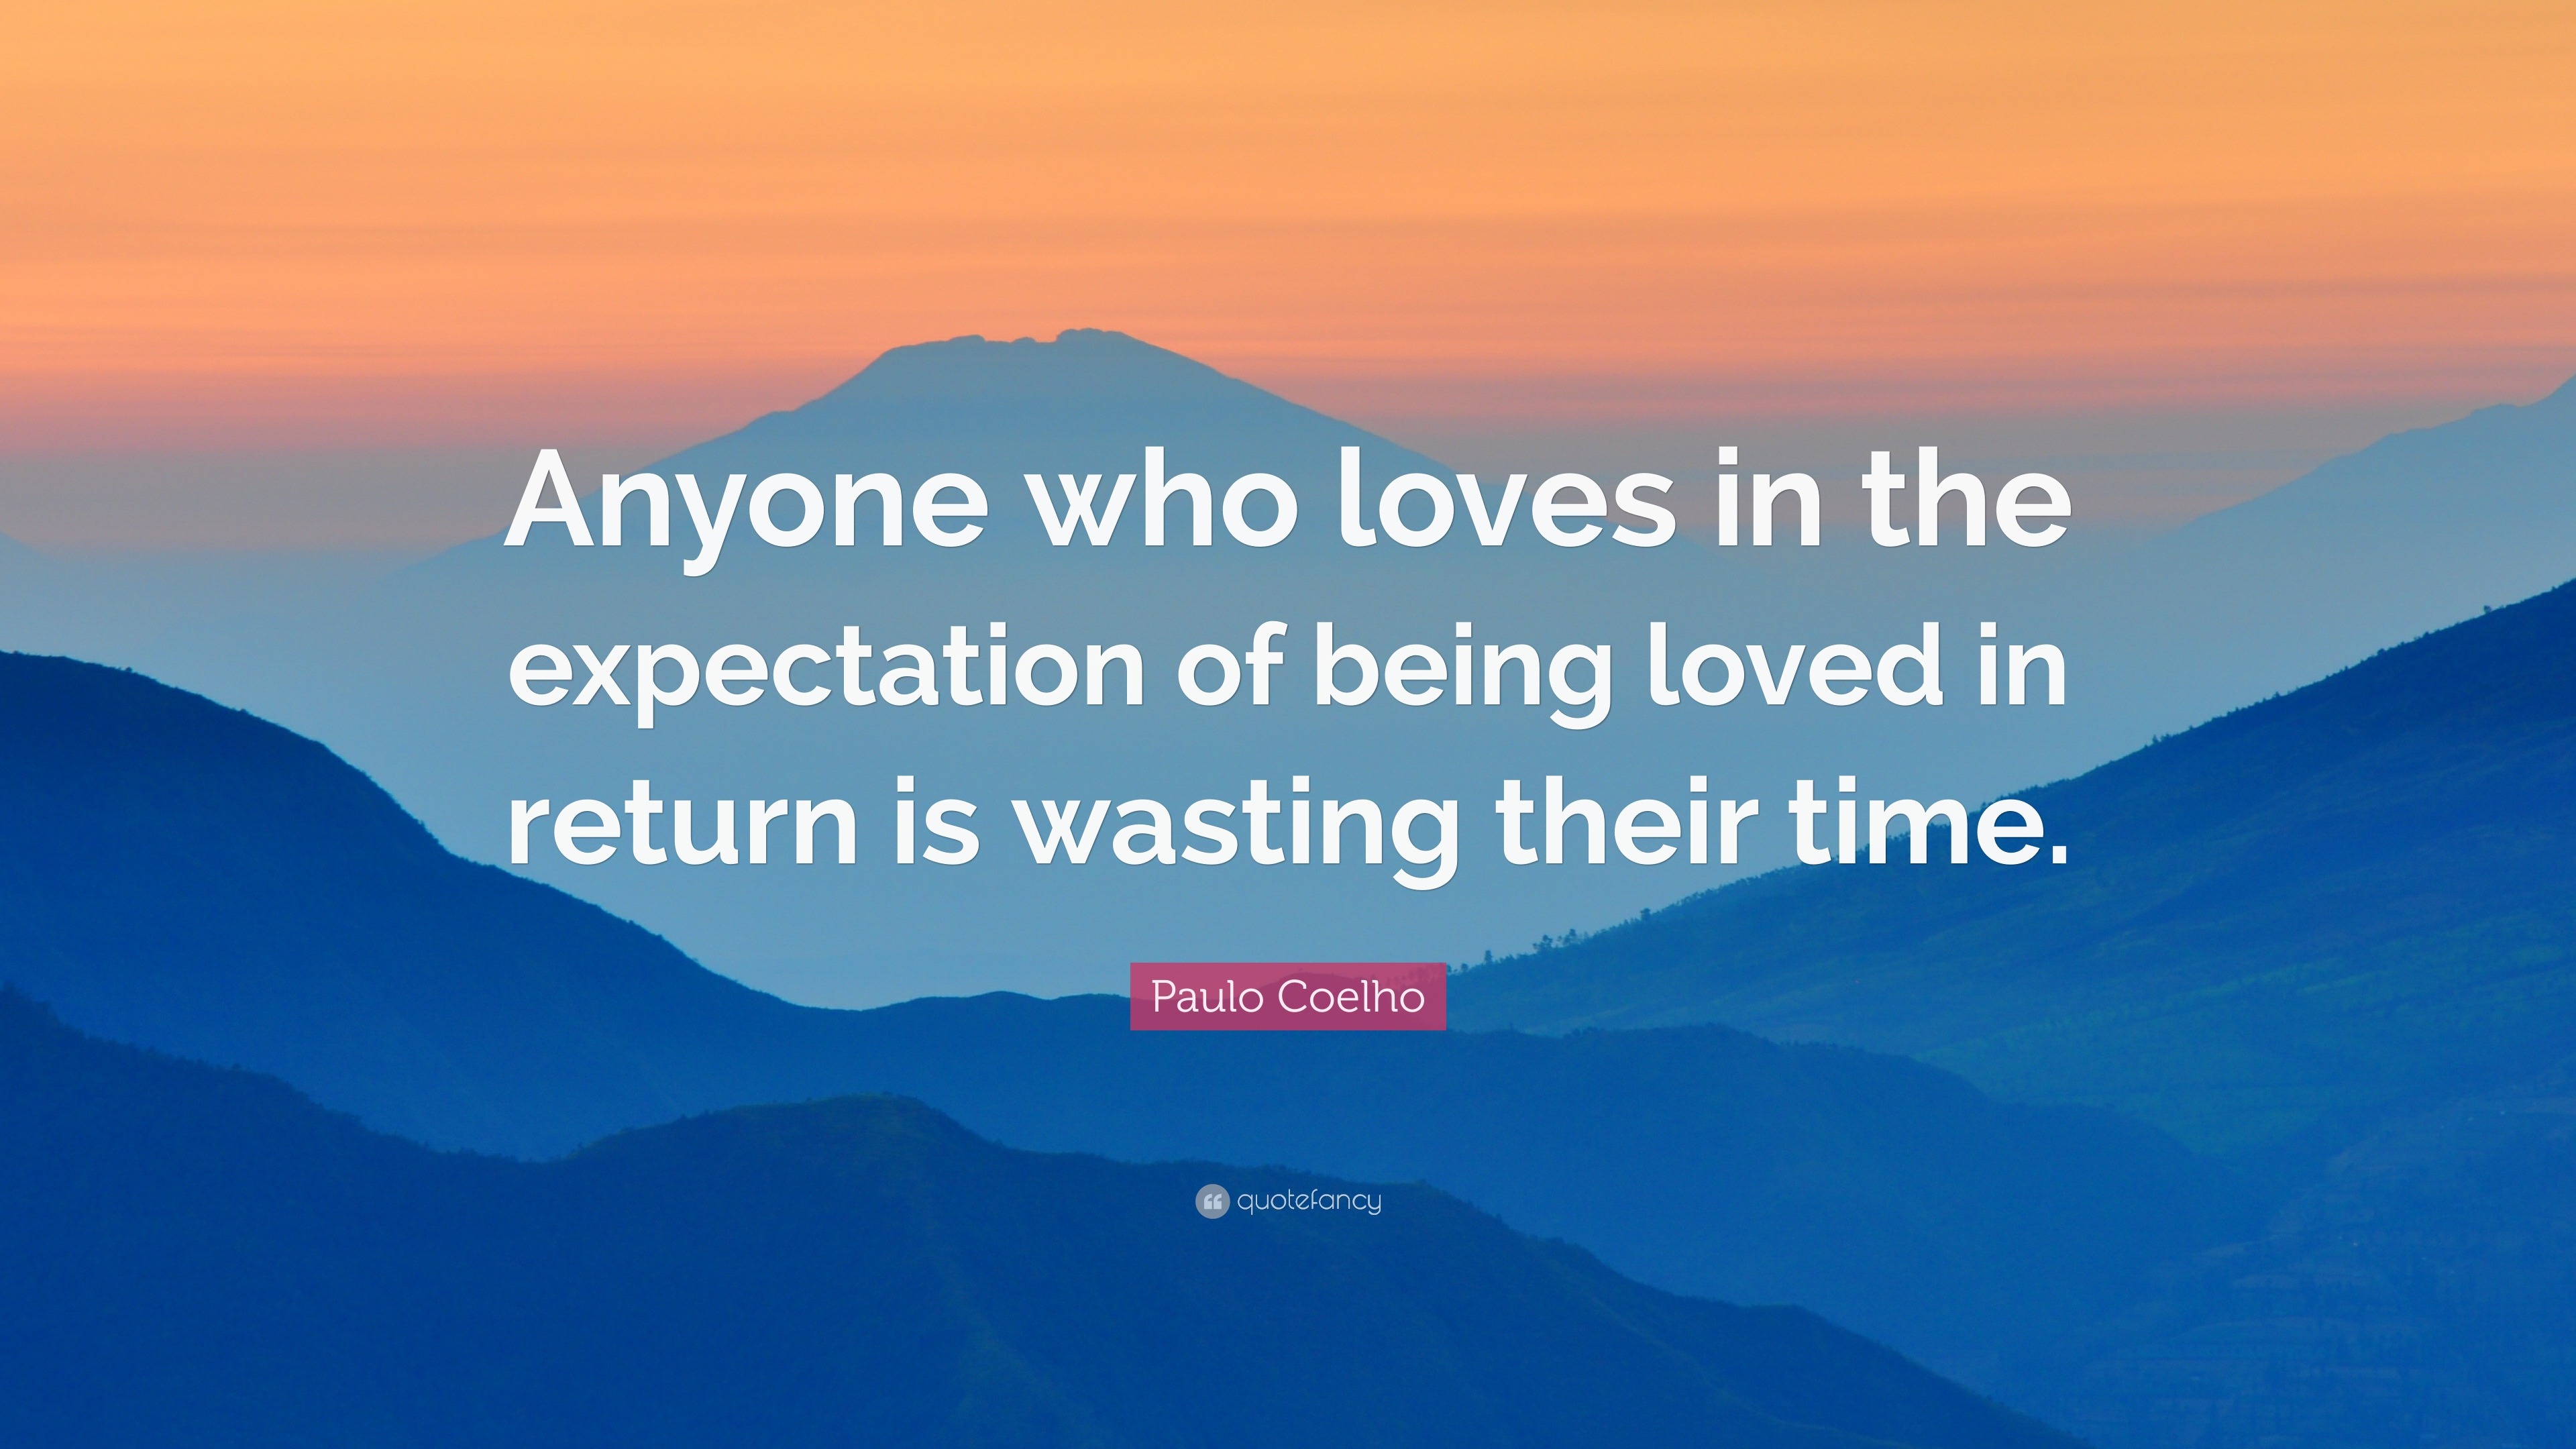 Paulo Coelho Quote: “Anyone who loves in the expectation of being loved ...